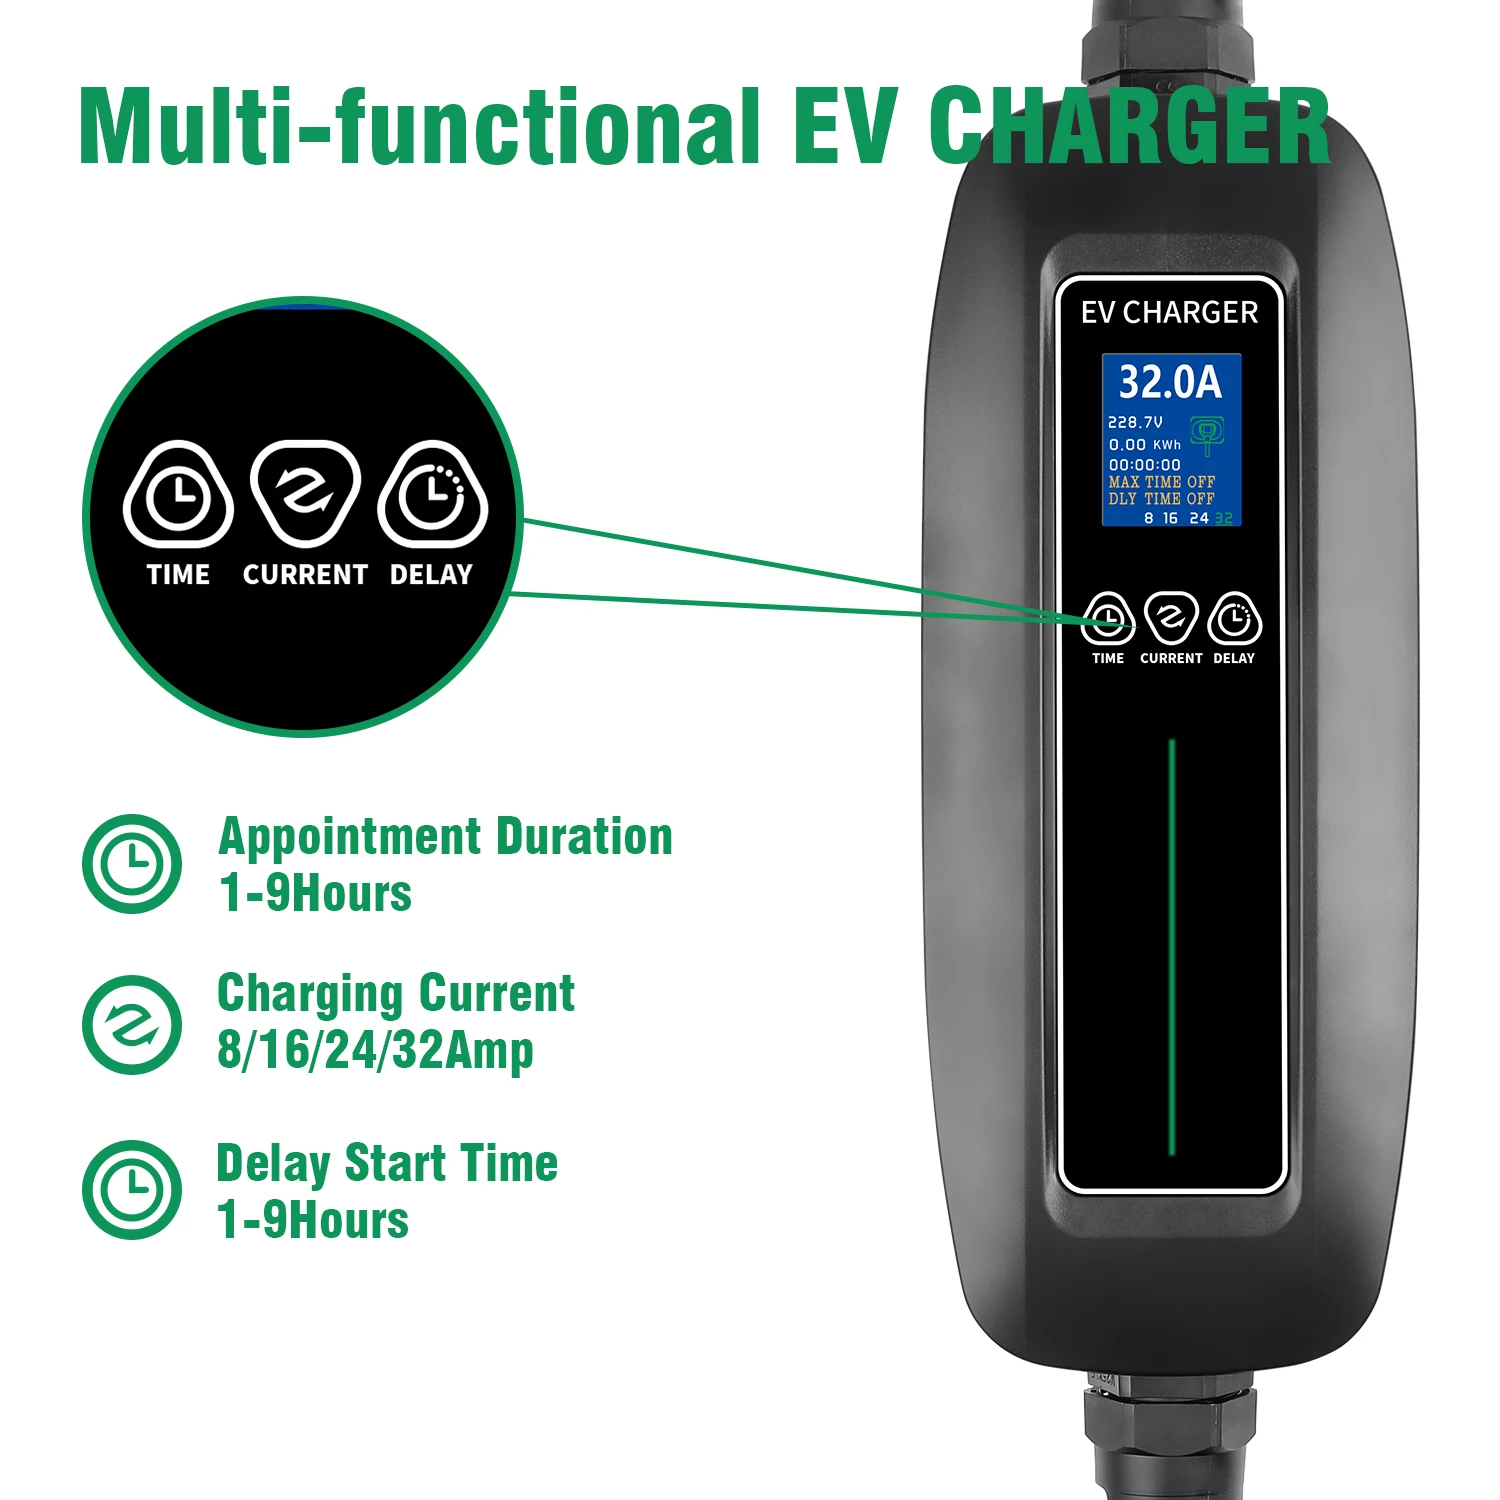 ev charger type 2 switchable 8162432a 1 phase portable ev charging box cable iec 62196 2 for evse electric vehicle for audi free global shipping